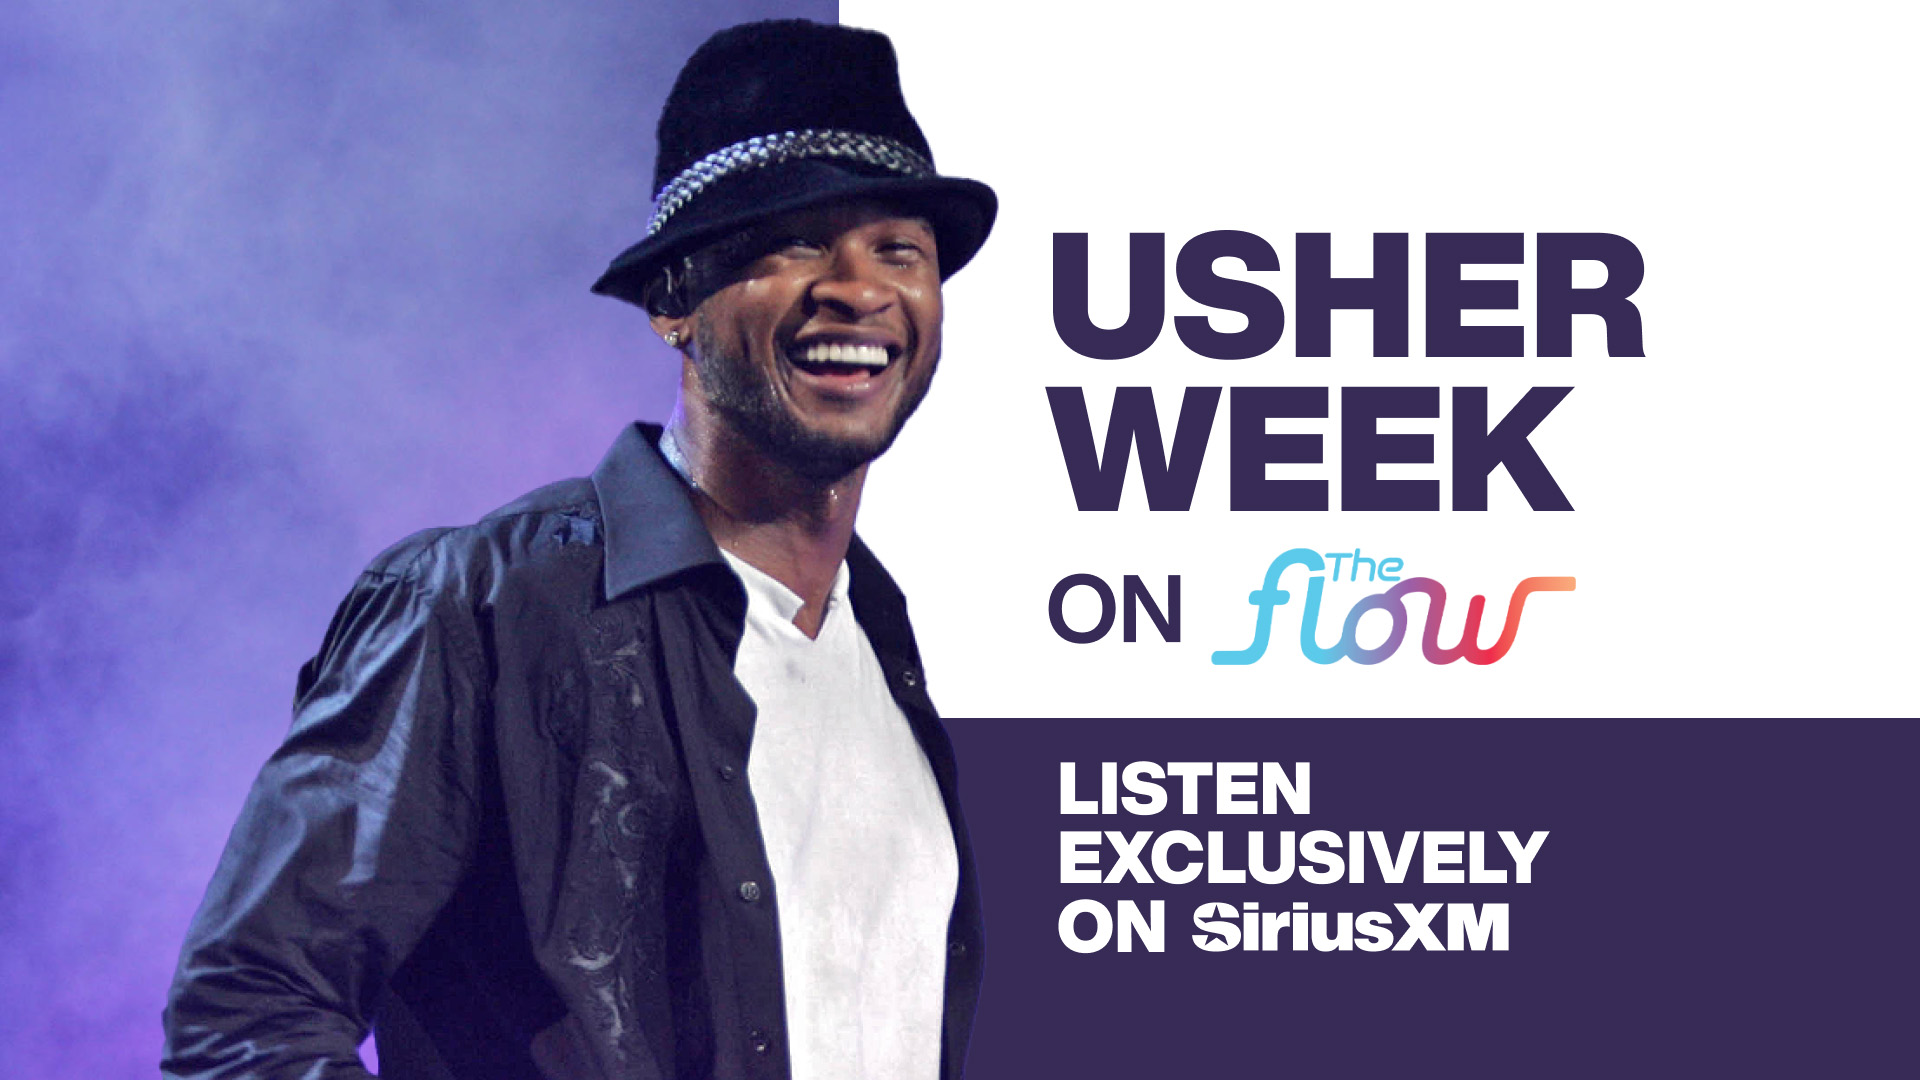 Usher Week on The Flow - Listen Exclusively on SiriusXM